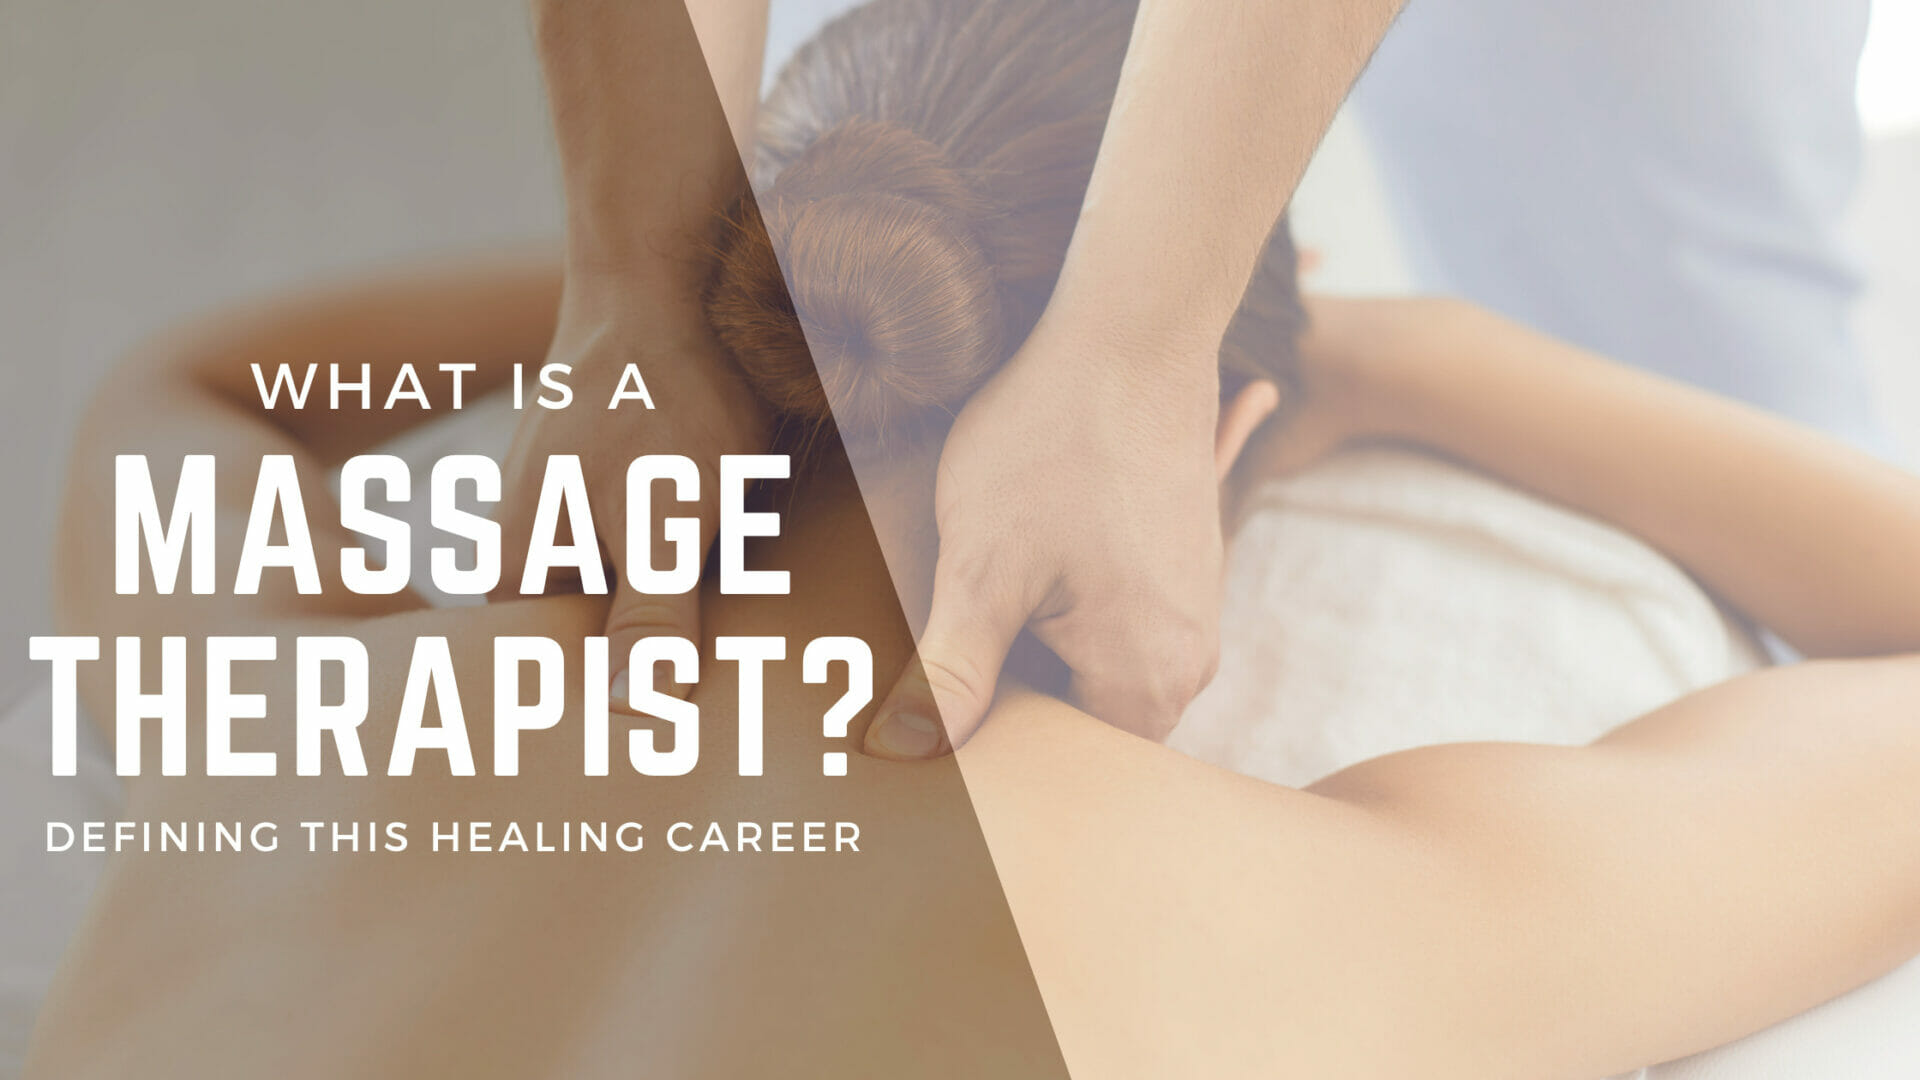 What is a massage therapist